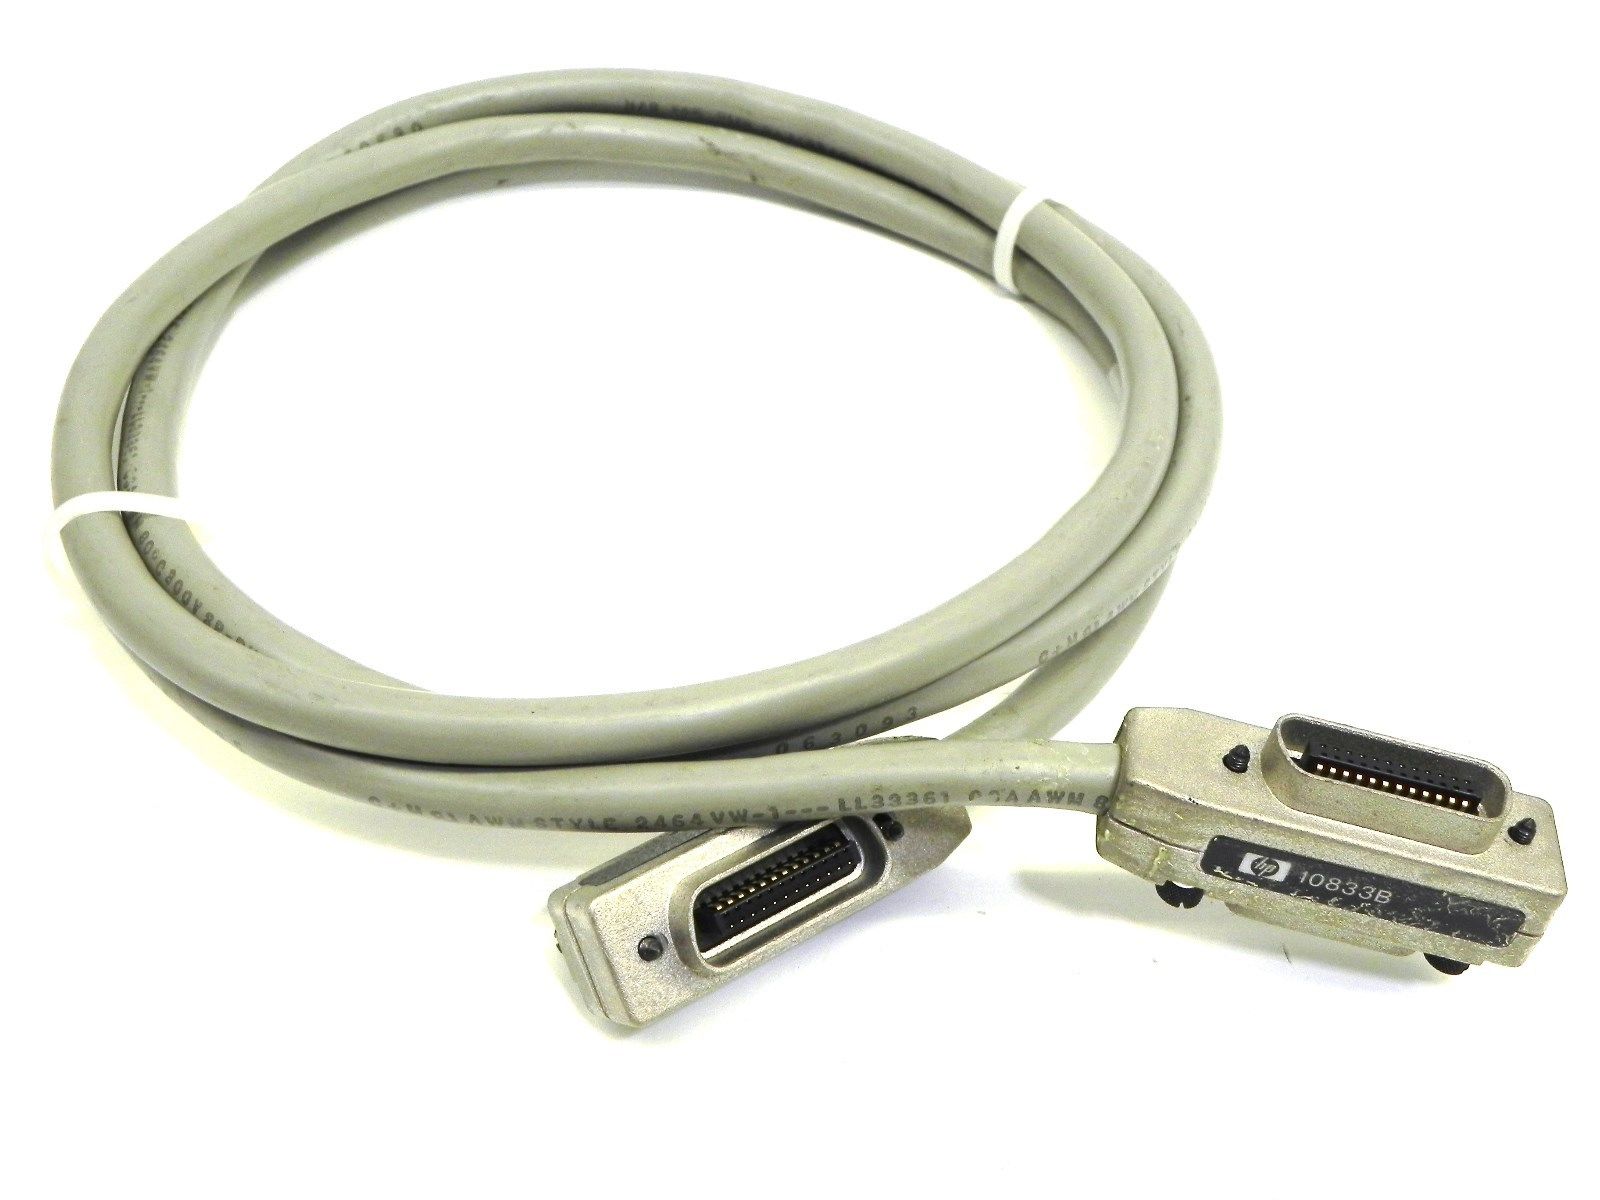 Agilent/HP 10833C HPIB Cable GPIB/IEEE-488 Compatible 4 Meters 